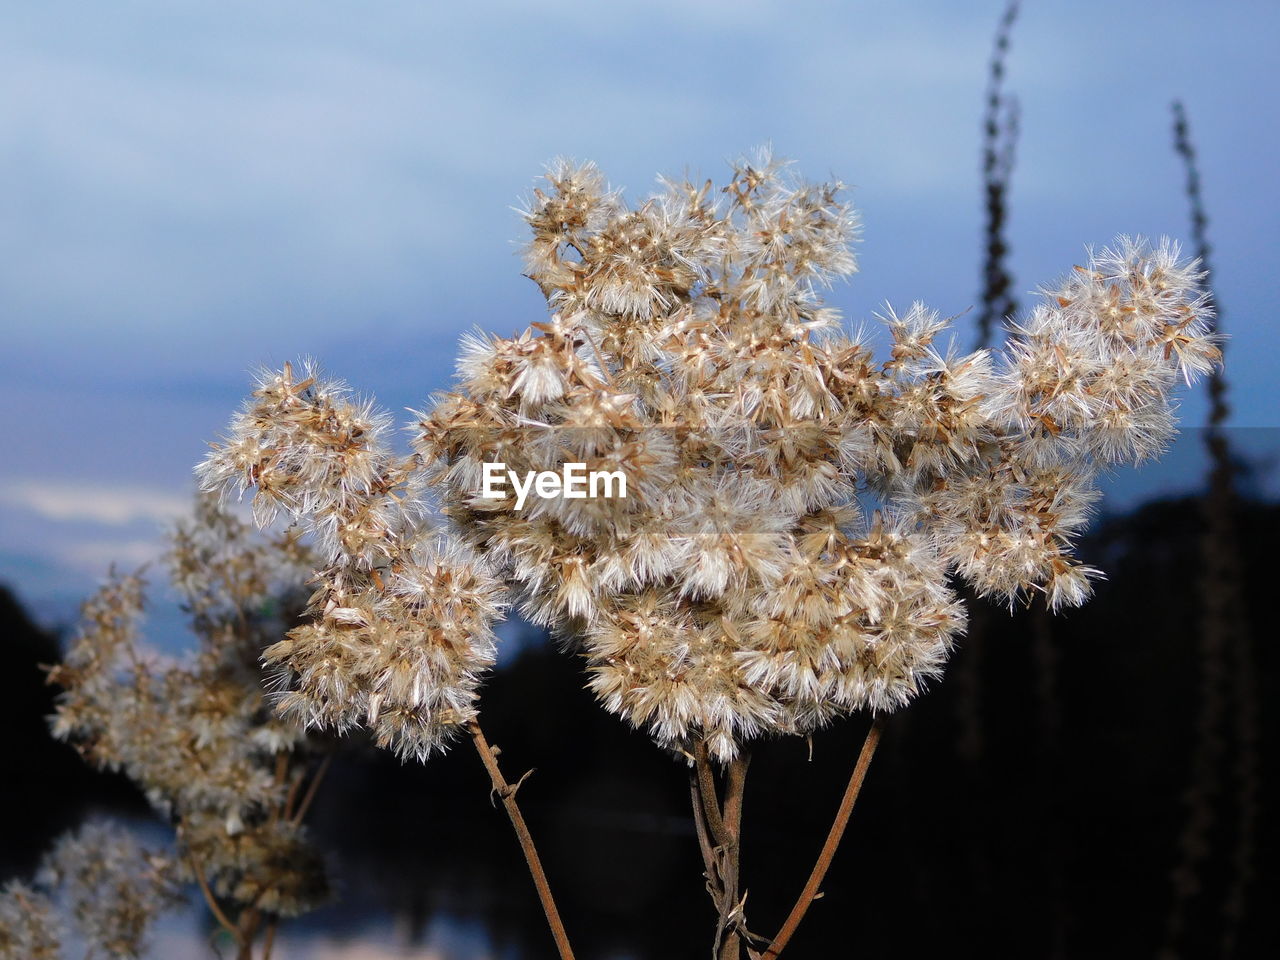 CLOSE-UP OF SNOW ON FLOWERING PLANT